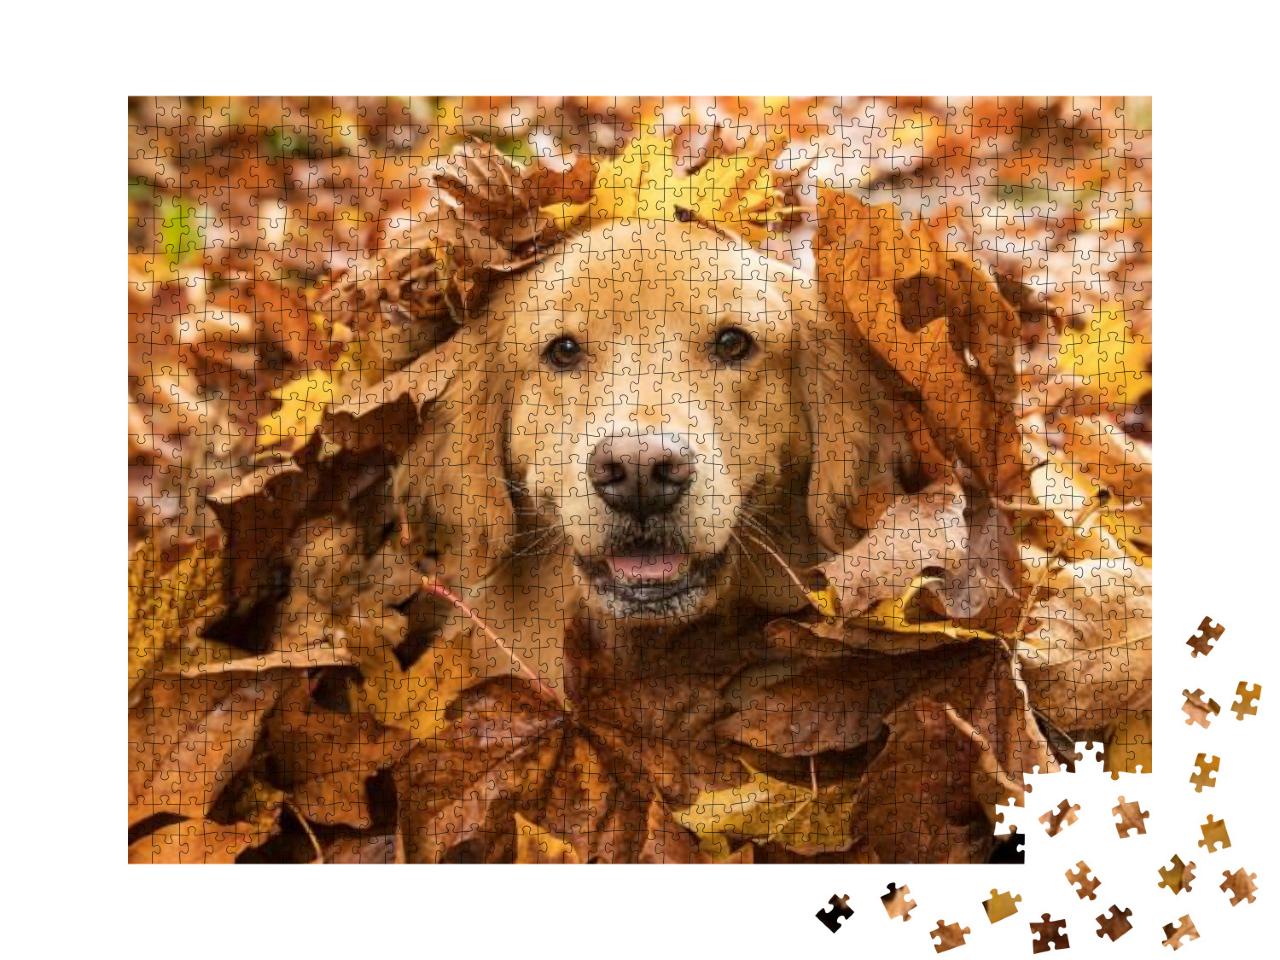 Golden Retriever Dog in a Pile of Fall Leaves... Jigsaw Puzzle with 1000 pieces